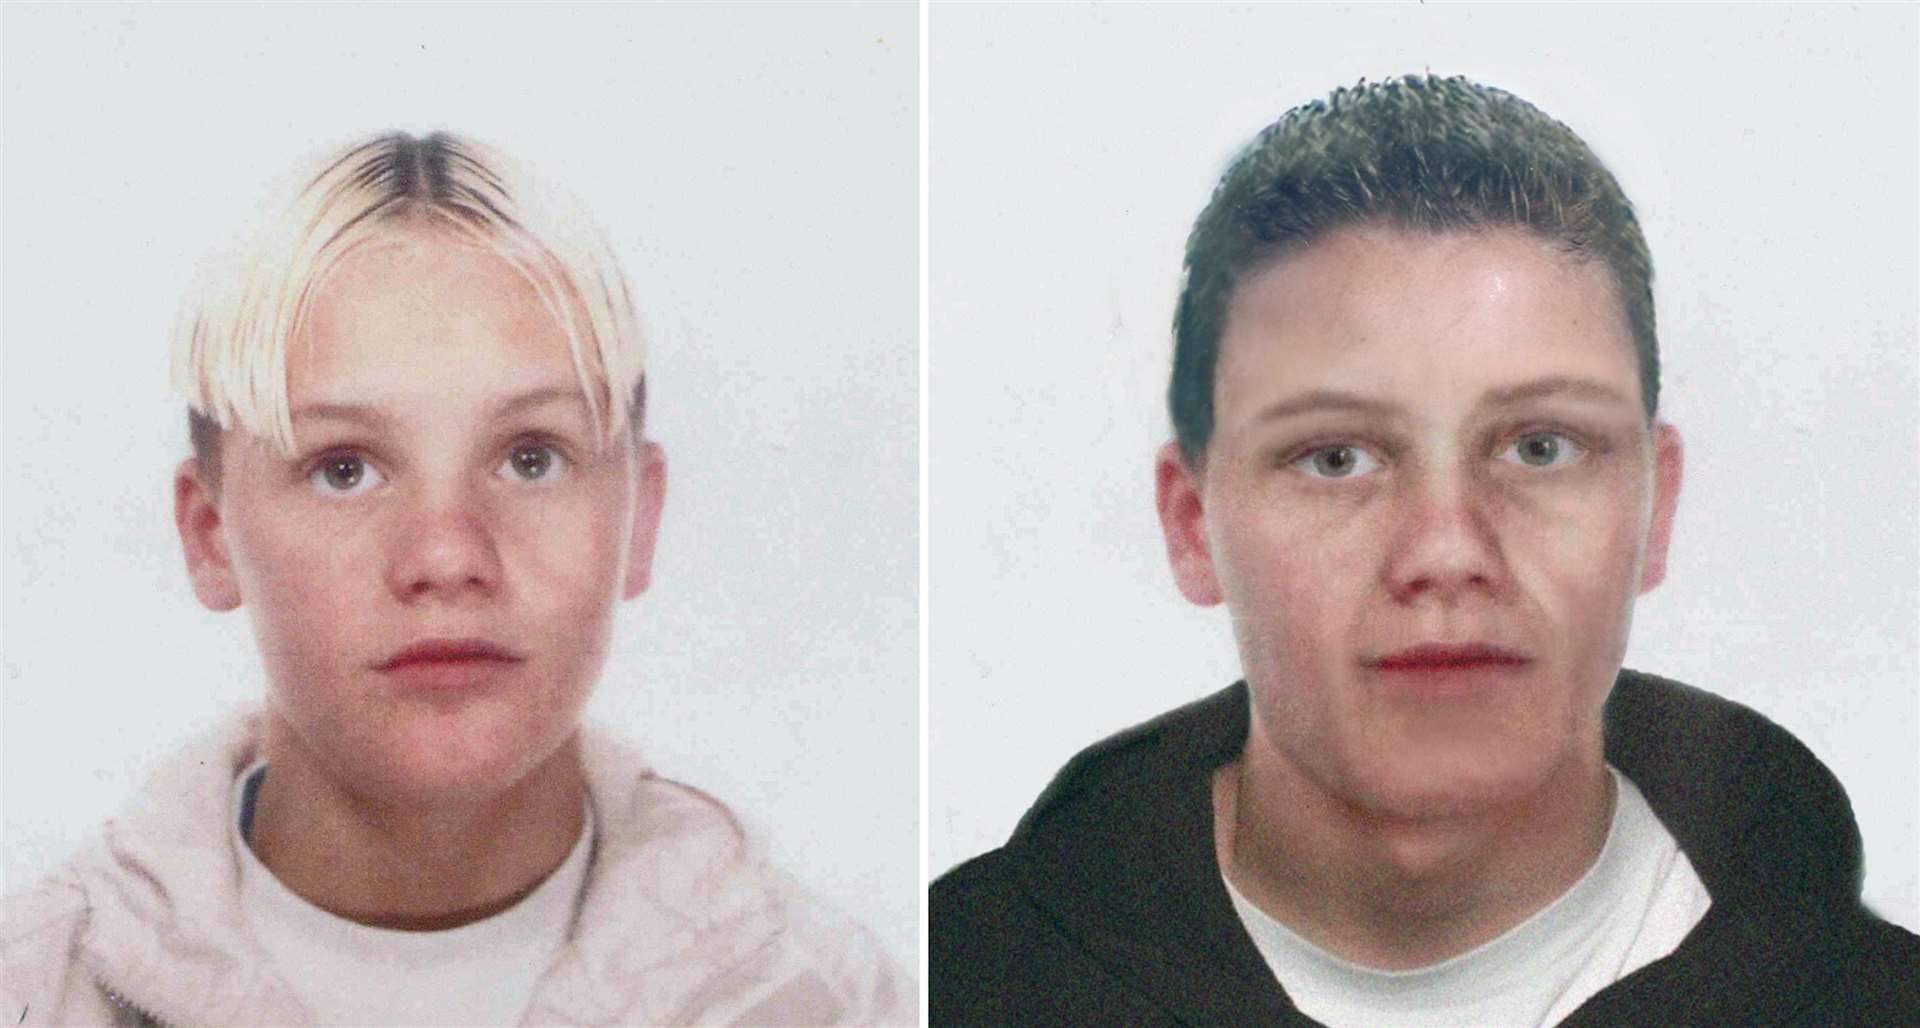 Robert Williams aged 15 (left), when he was last seen alive, and an artist’s age progression photograph (right) of how he might have looked in 2011 aged 24 (South Wales Police/PA)